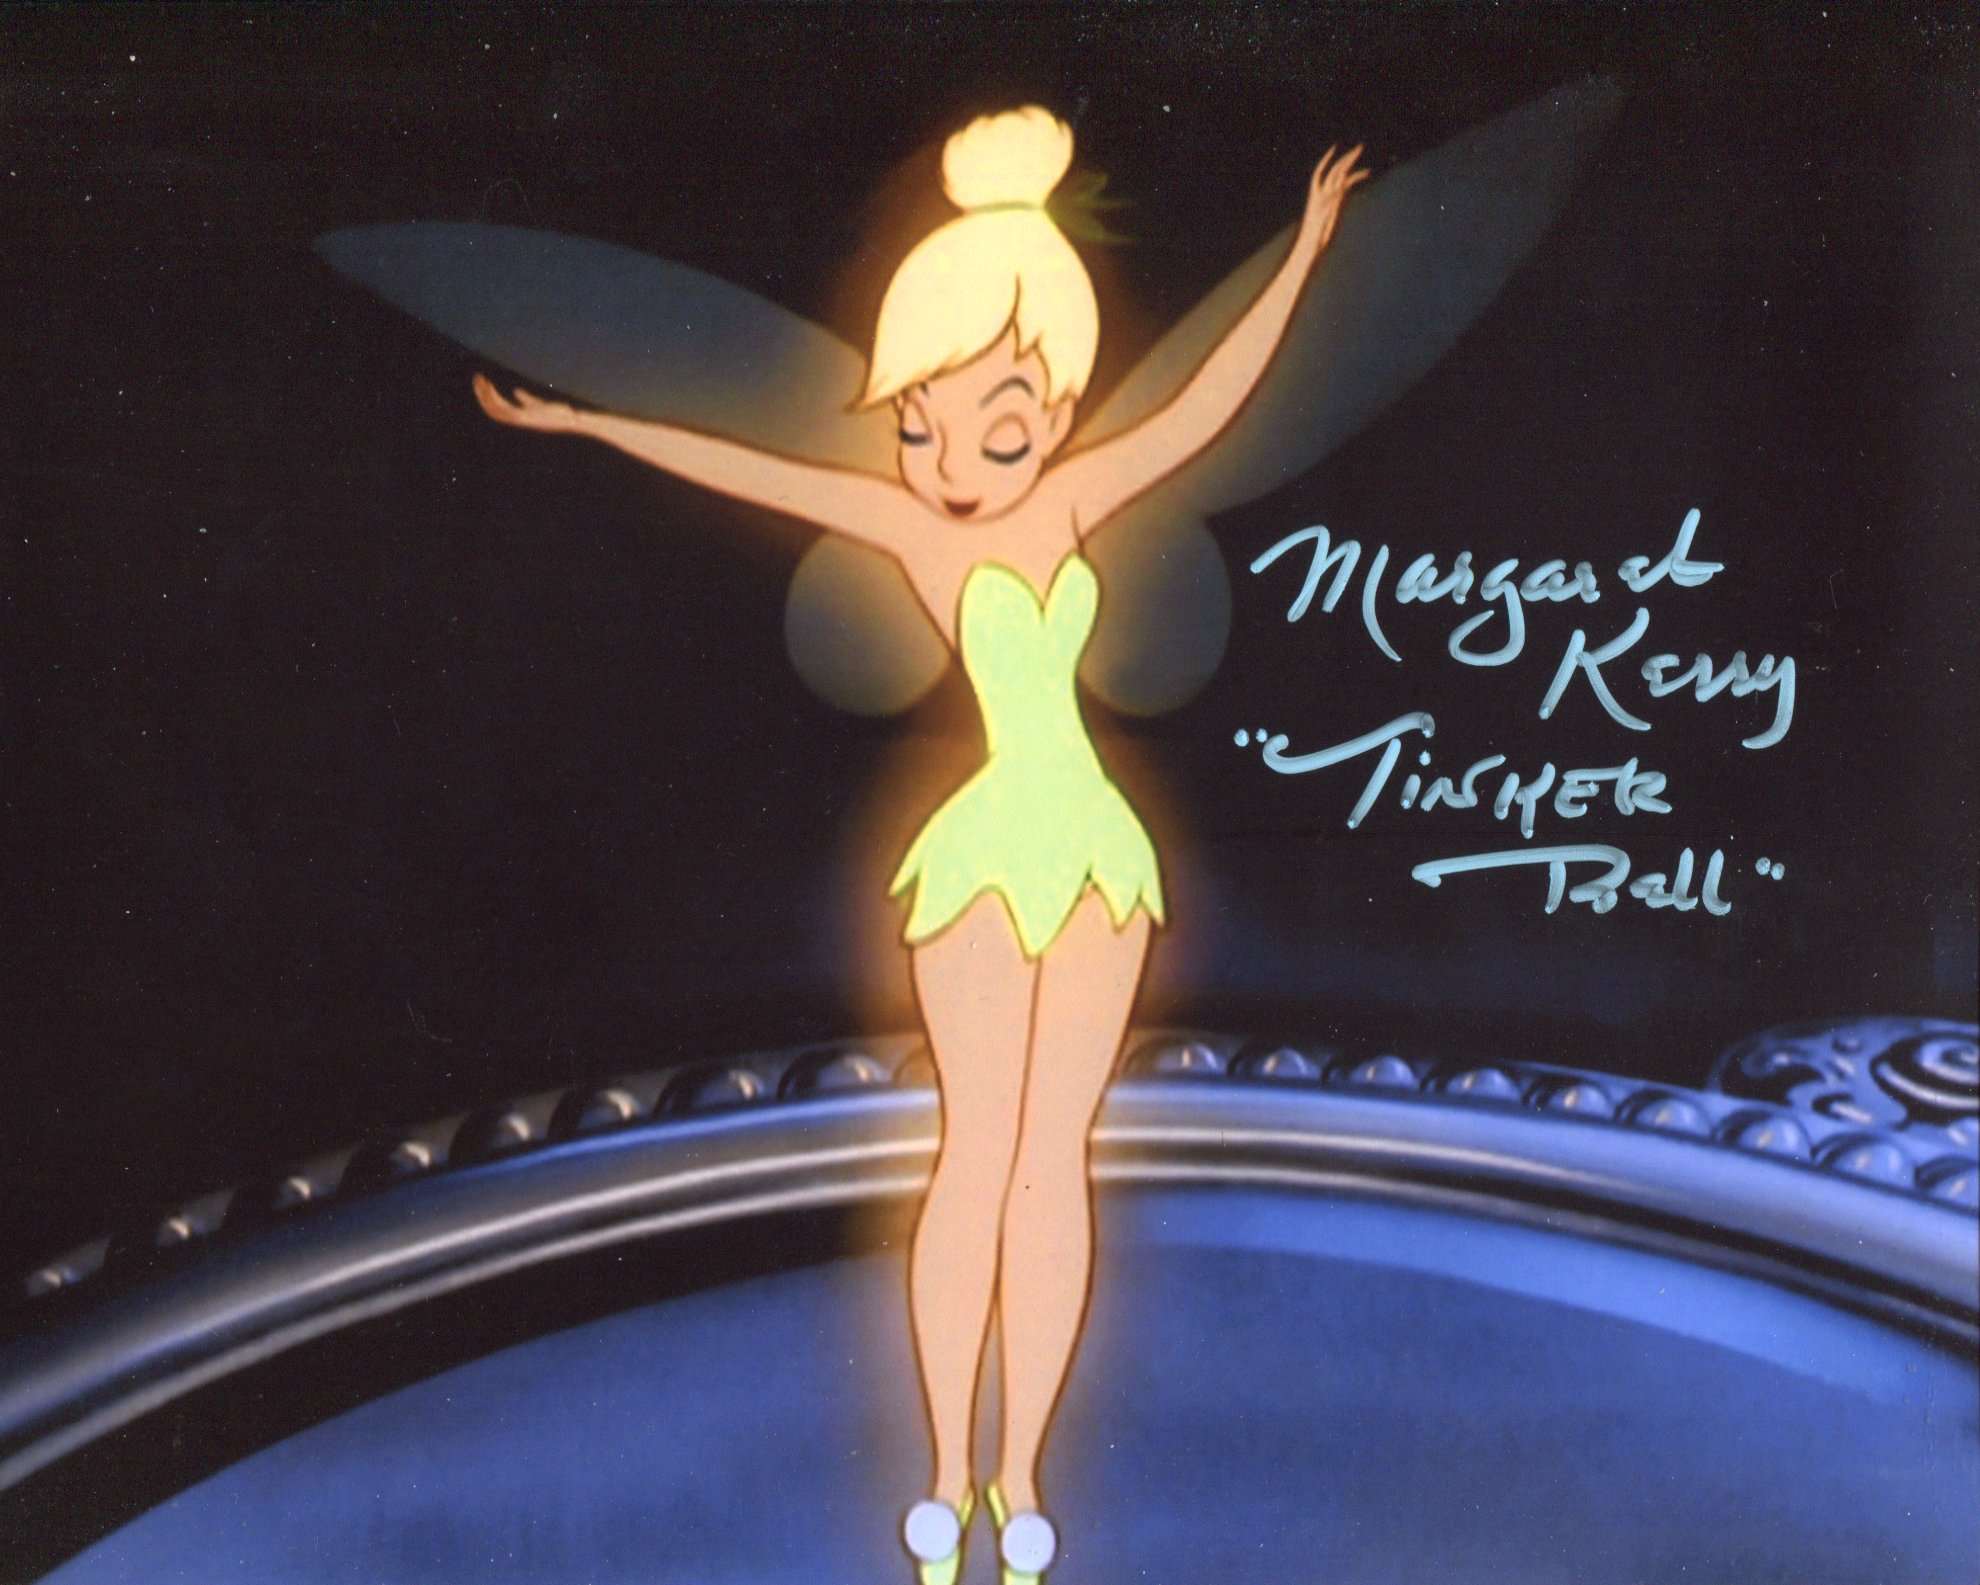 Peter Pan. 8x10 photo from Walt Disney's Peter Pan signed by actress Margaret Kerry, who was